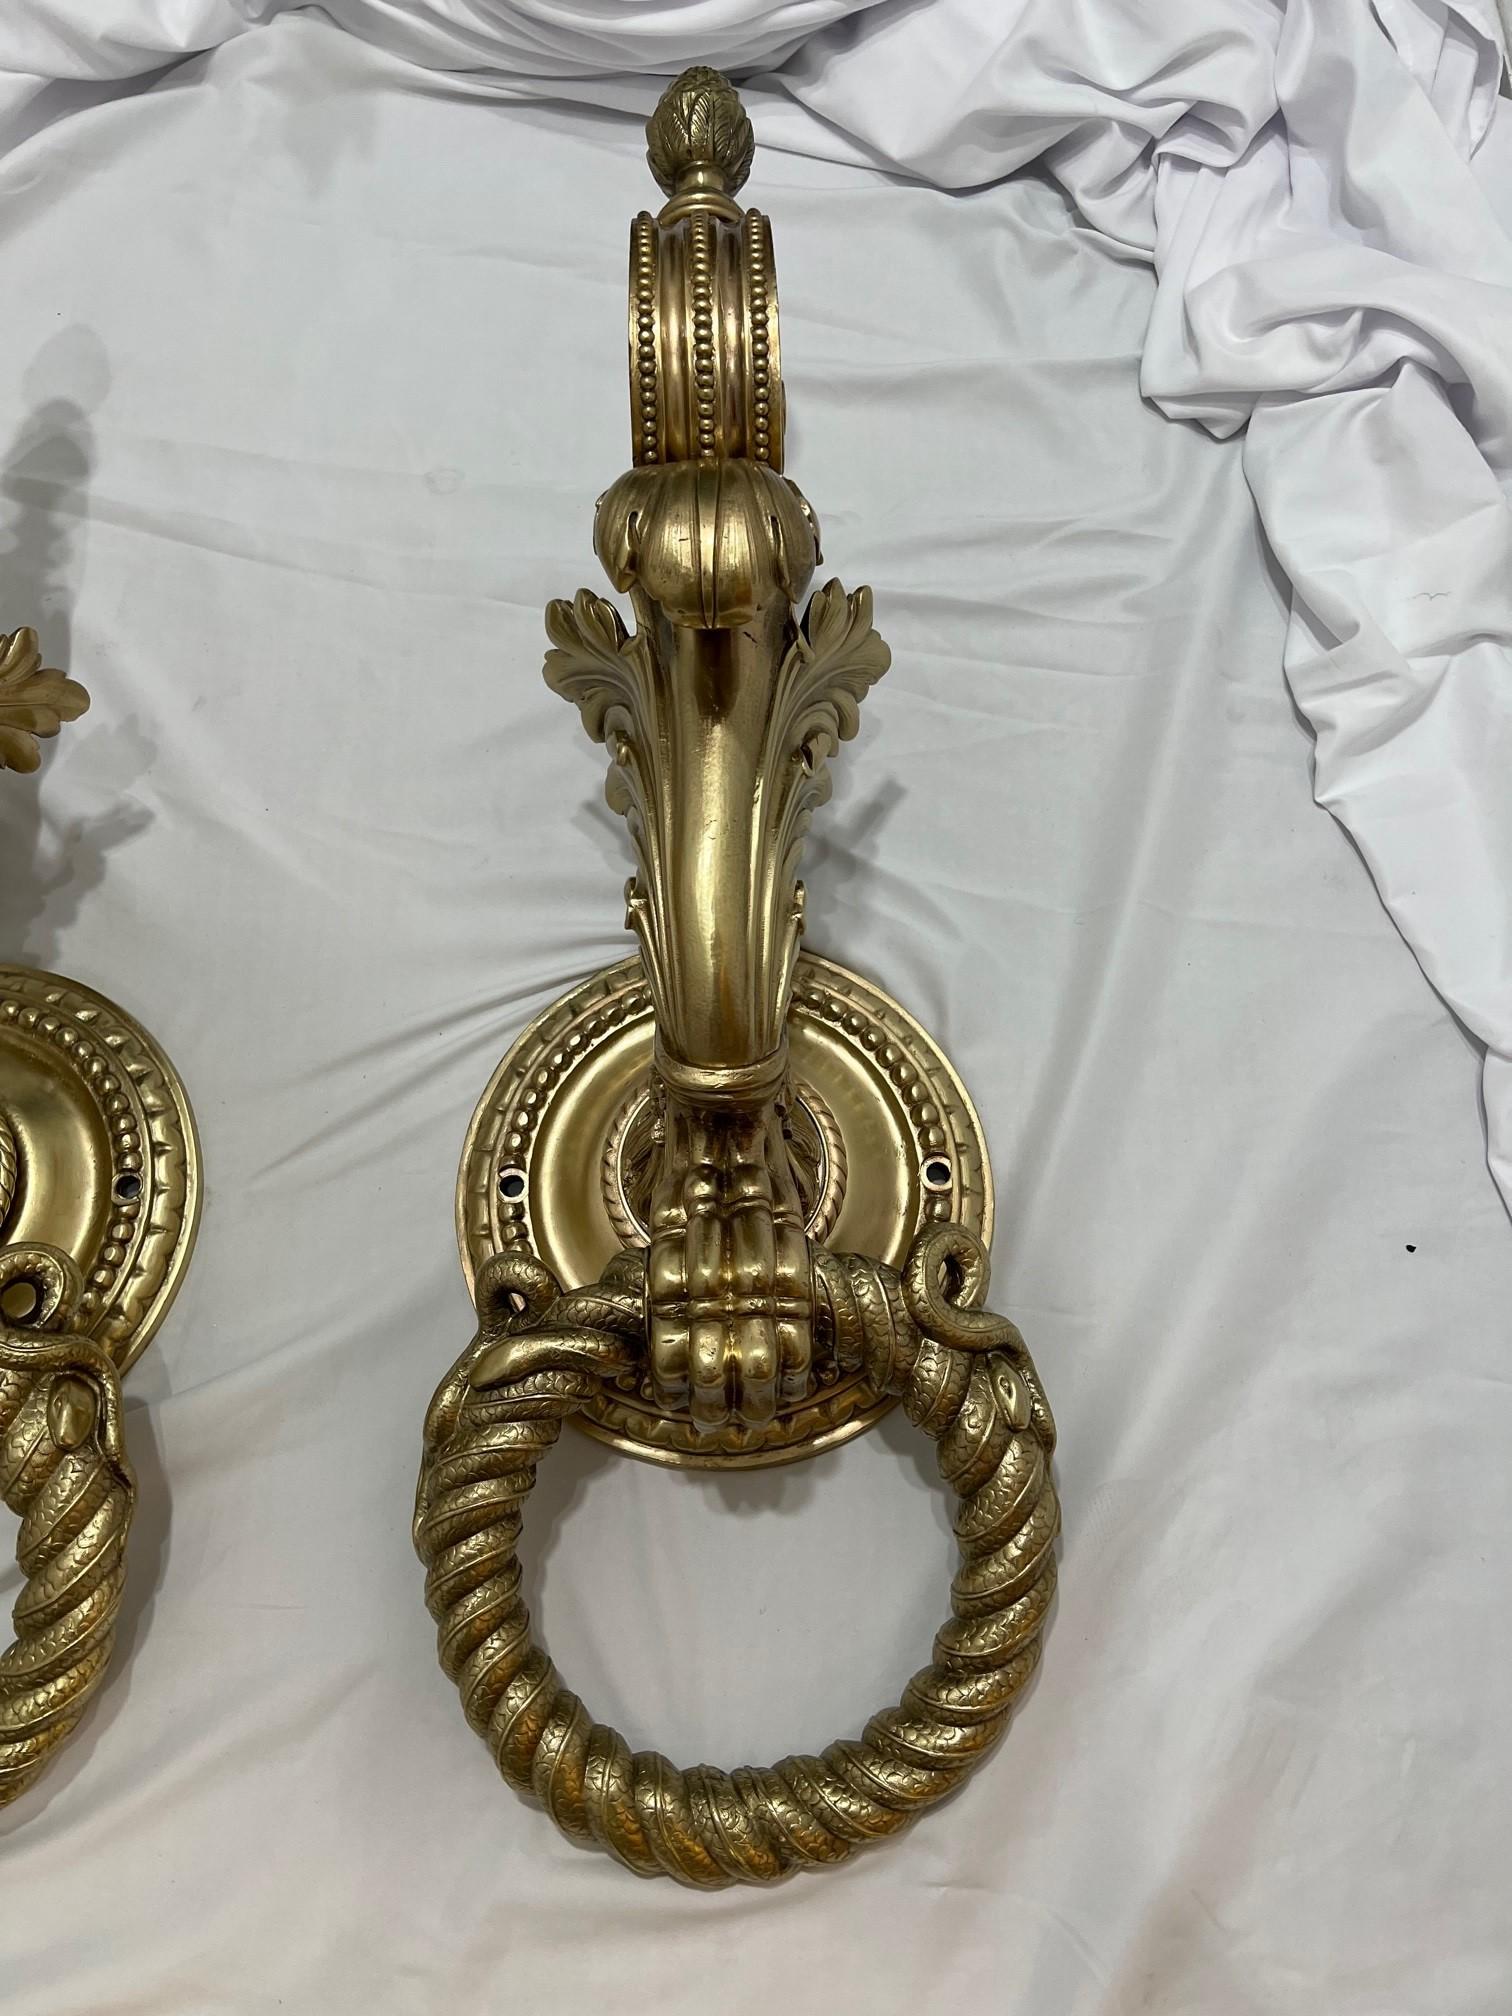 Mid 19th Century Pair of Monumental Antique Architectural Bronze Door Knockers   In Good Condition For Sale In Stamford, CT